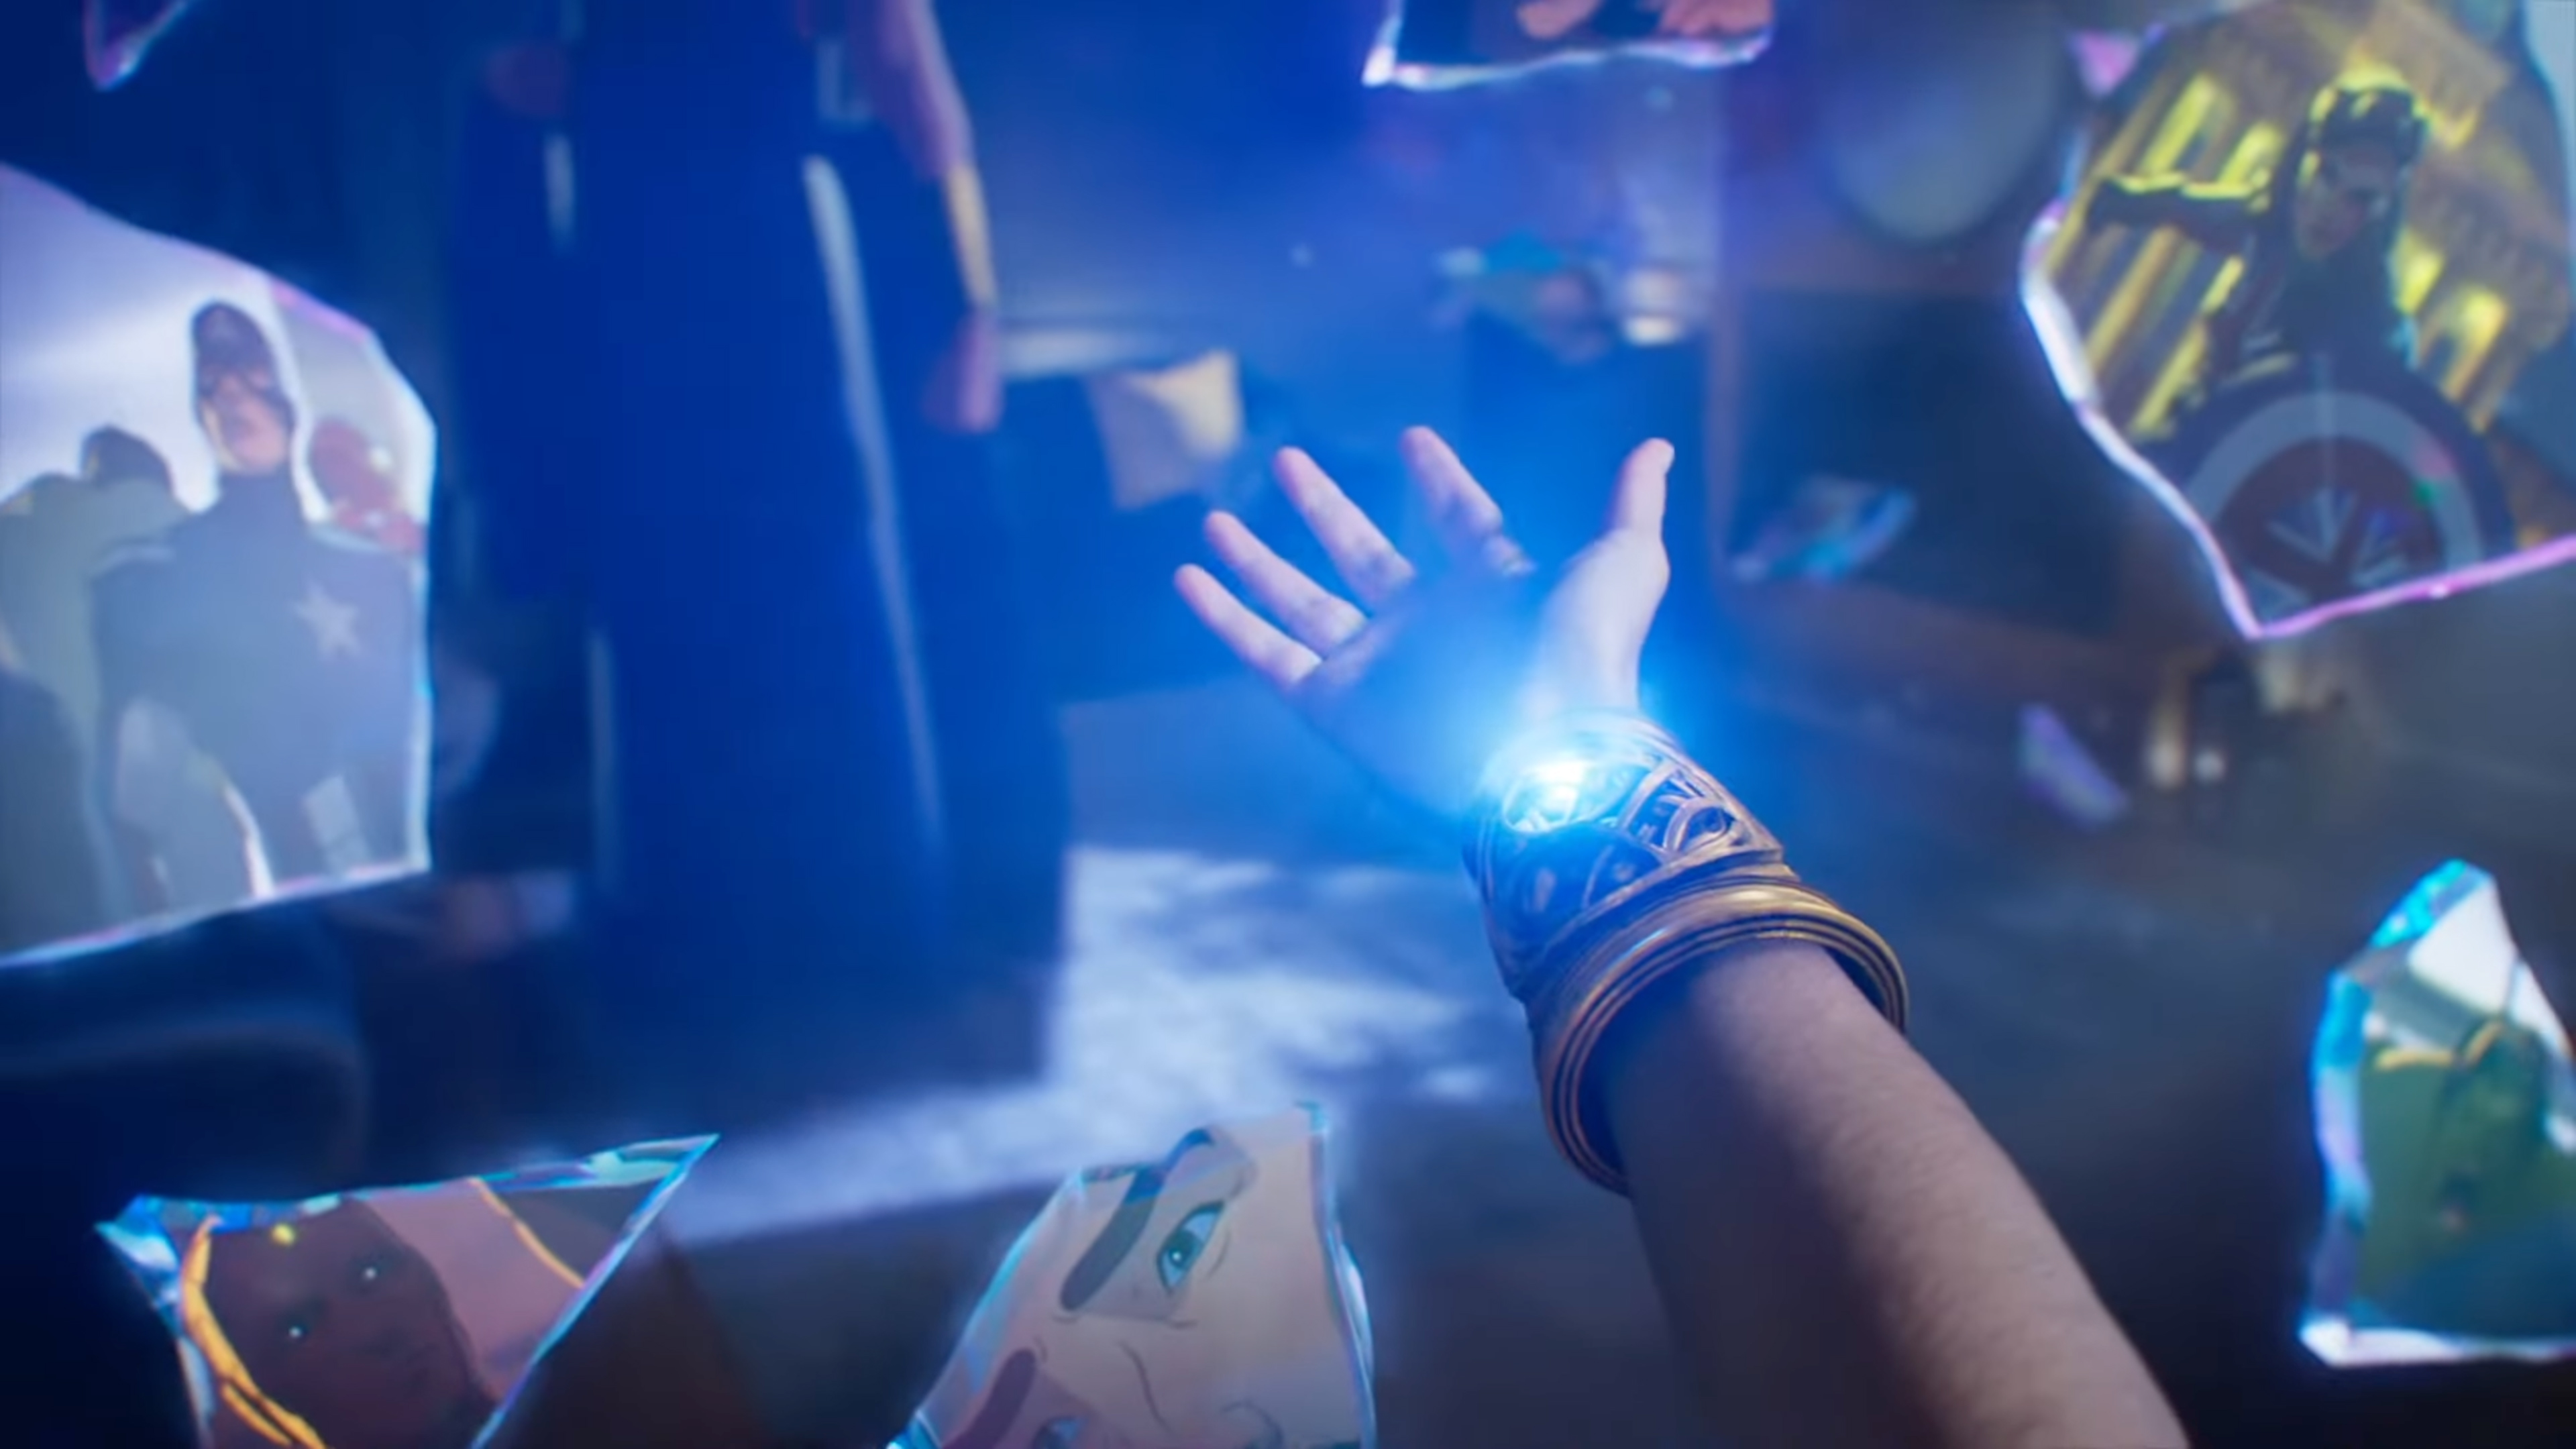 A hand reaching out with a glowing wrist